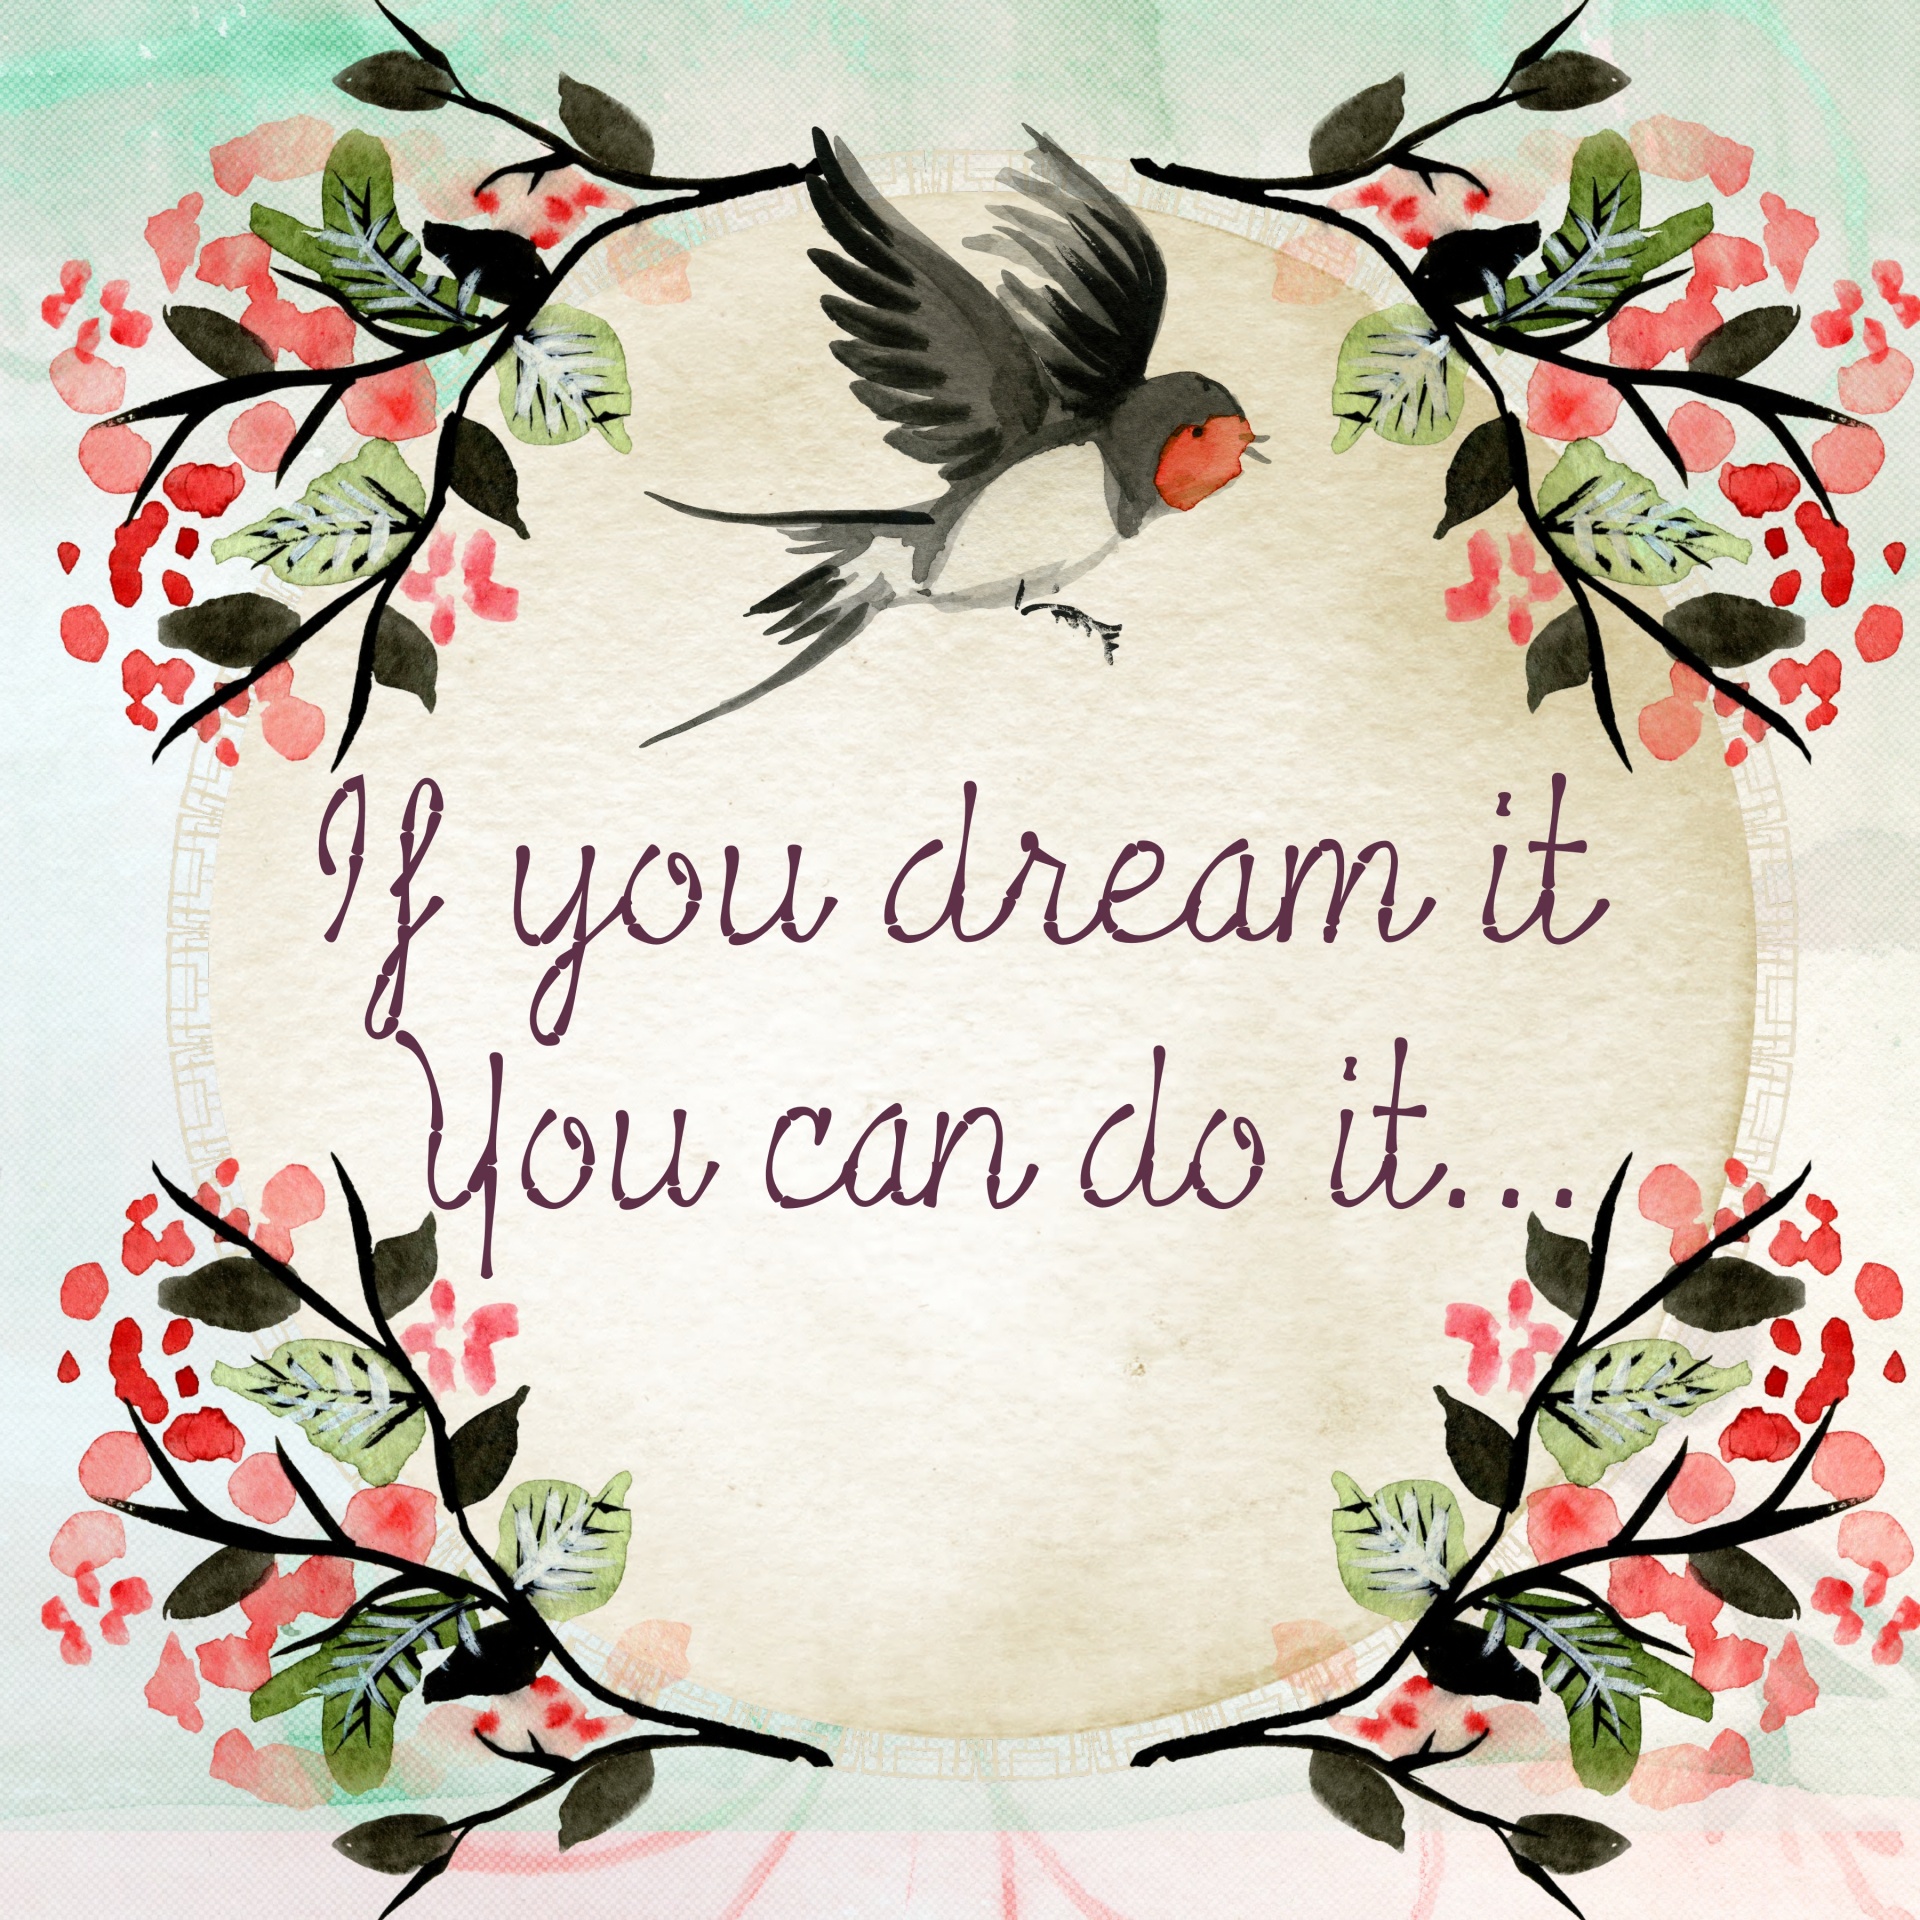 Quote Dreams Calligraphy Message Free Stock Photo - Public Domain Pictures